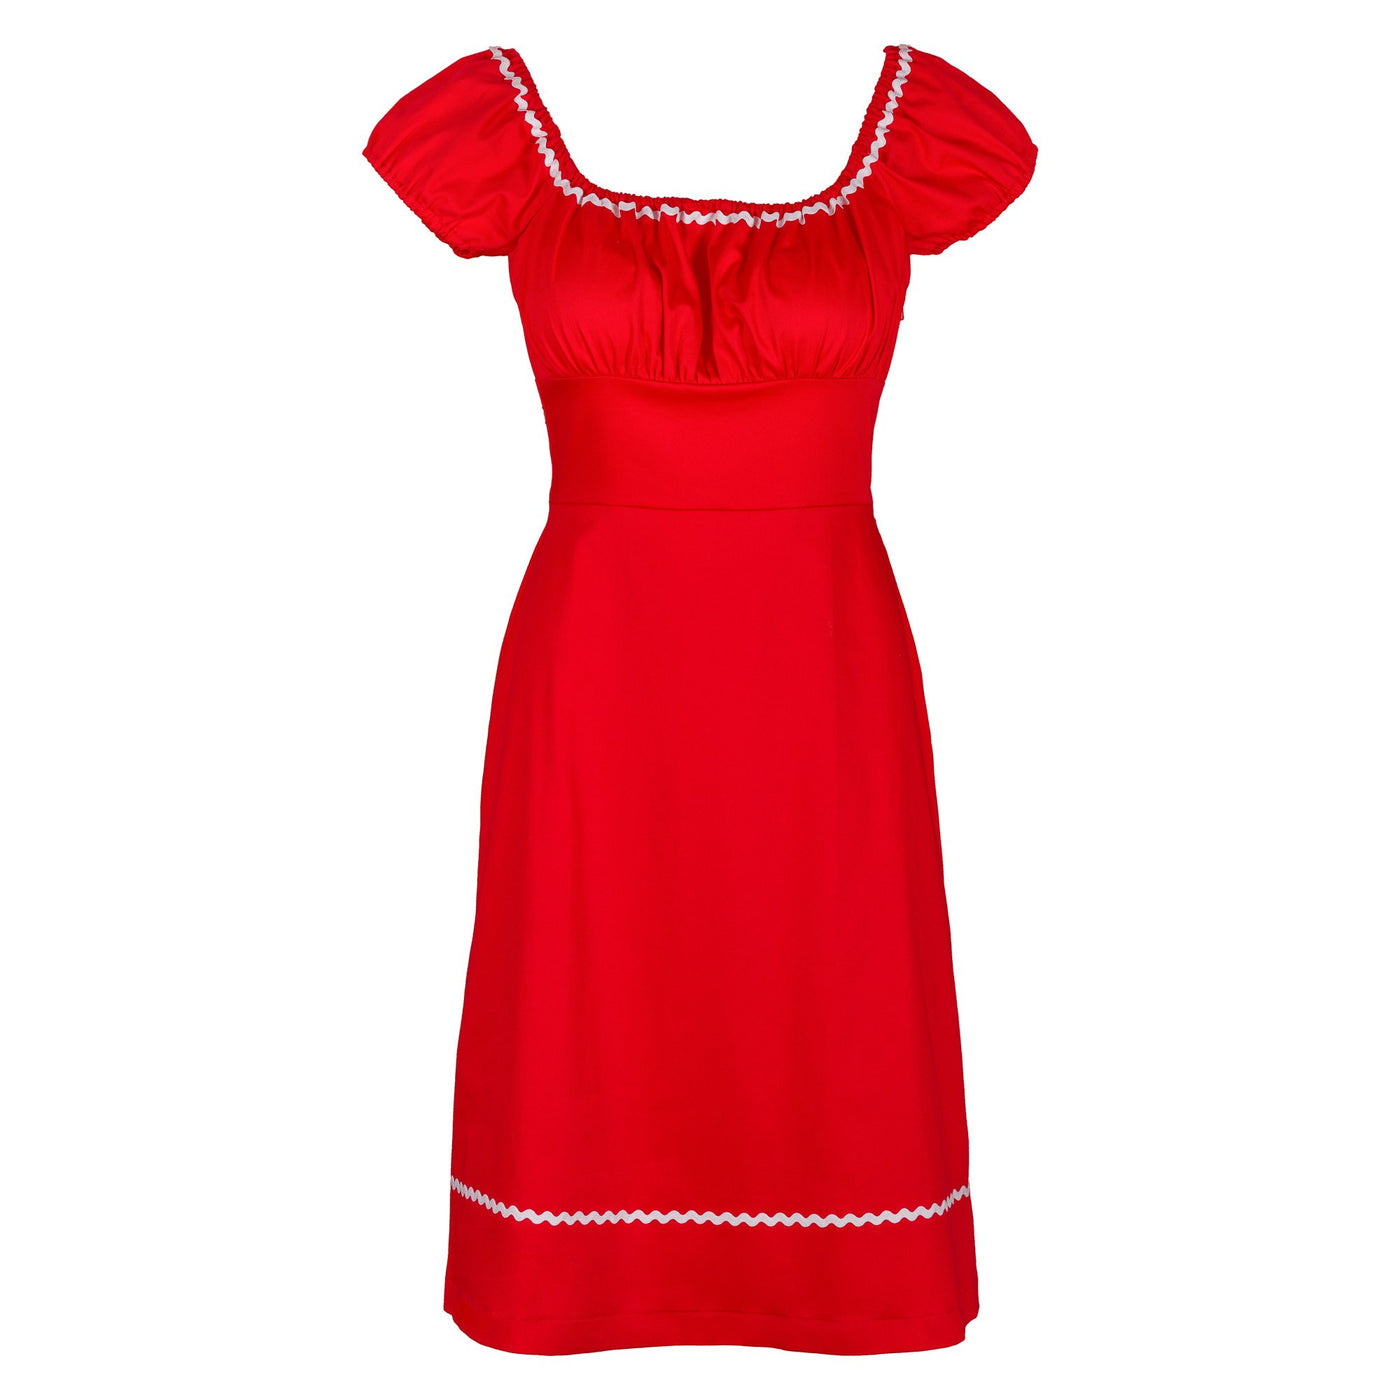 Dollydagger Polly Red Stretch Cotton Dress